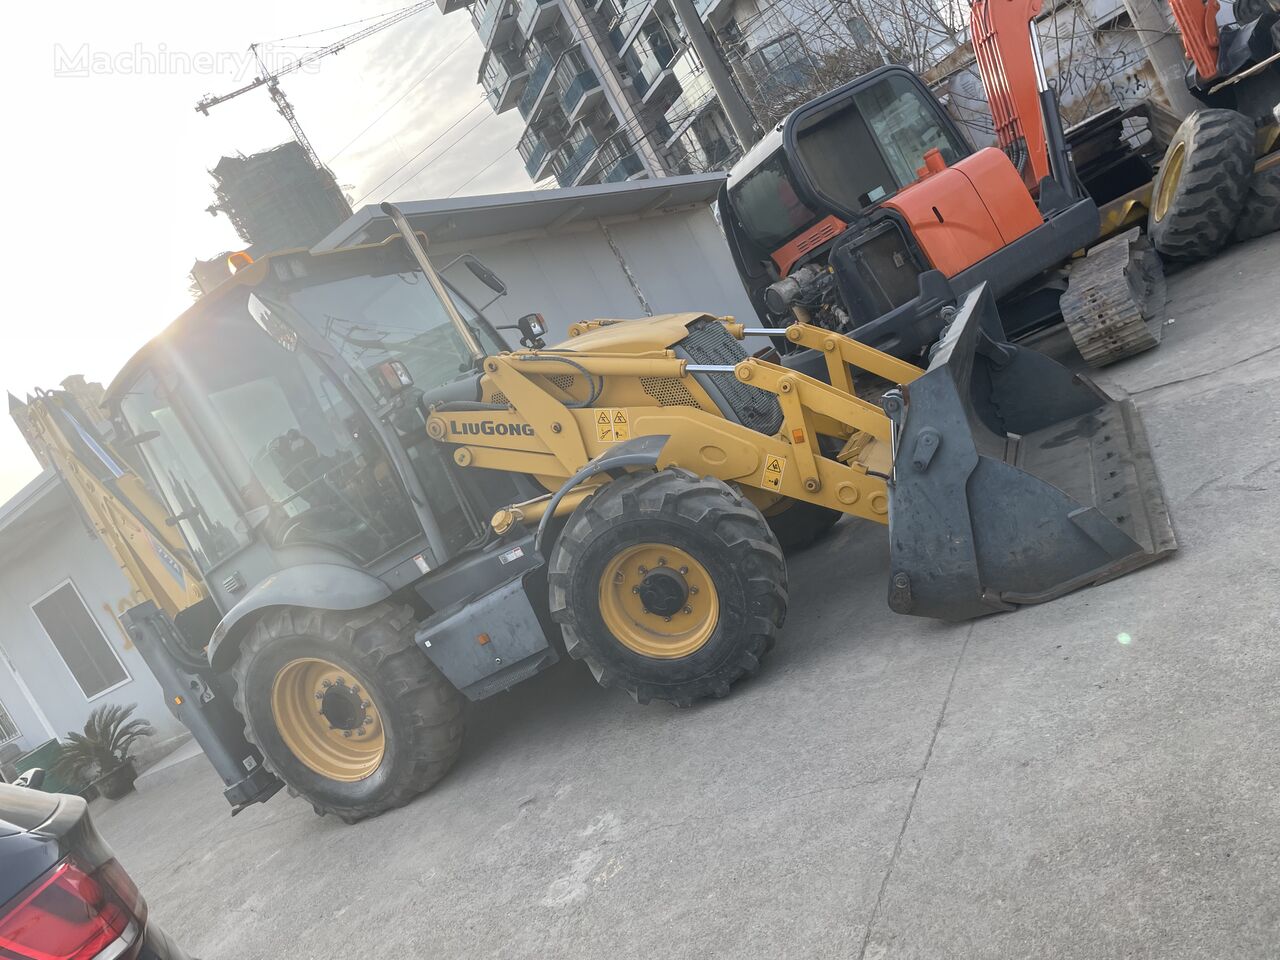 LiuGong CLG777 Backhoe loader in excellent Liugong Qaulity